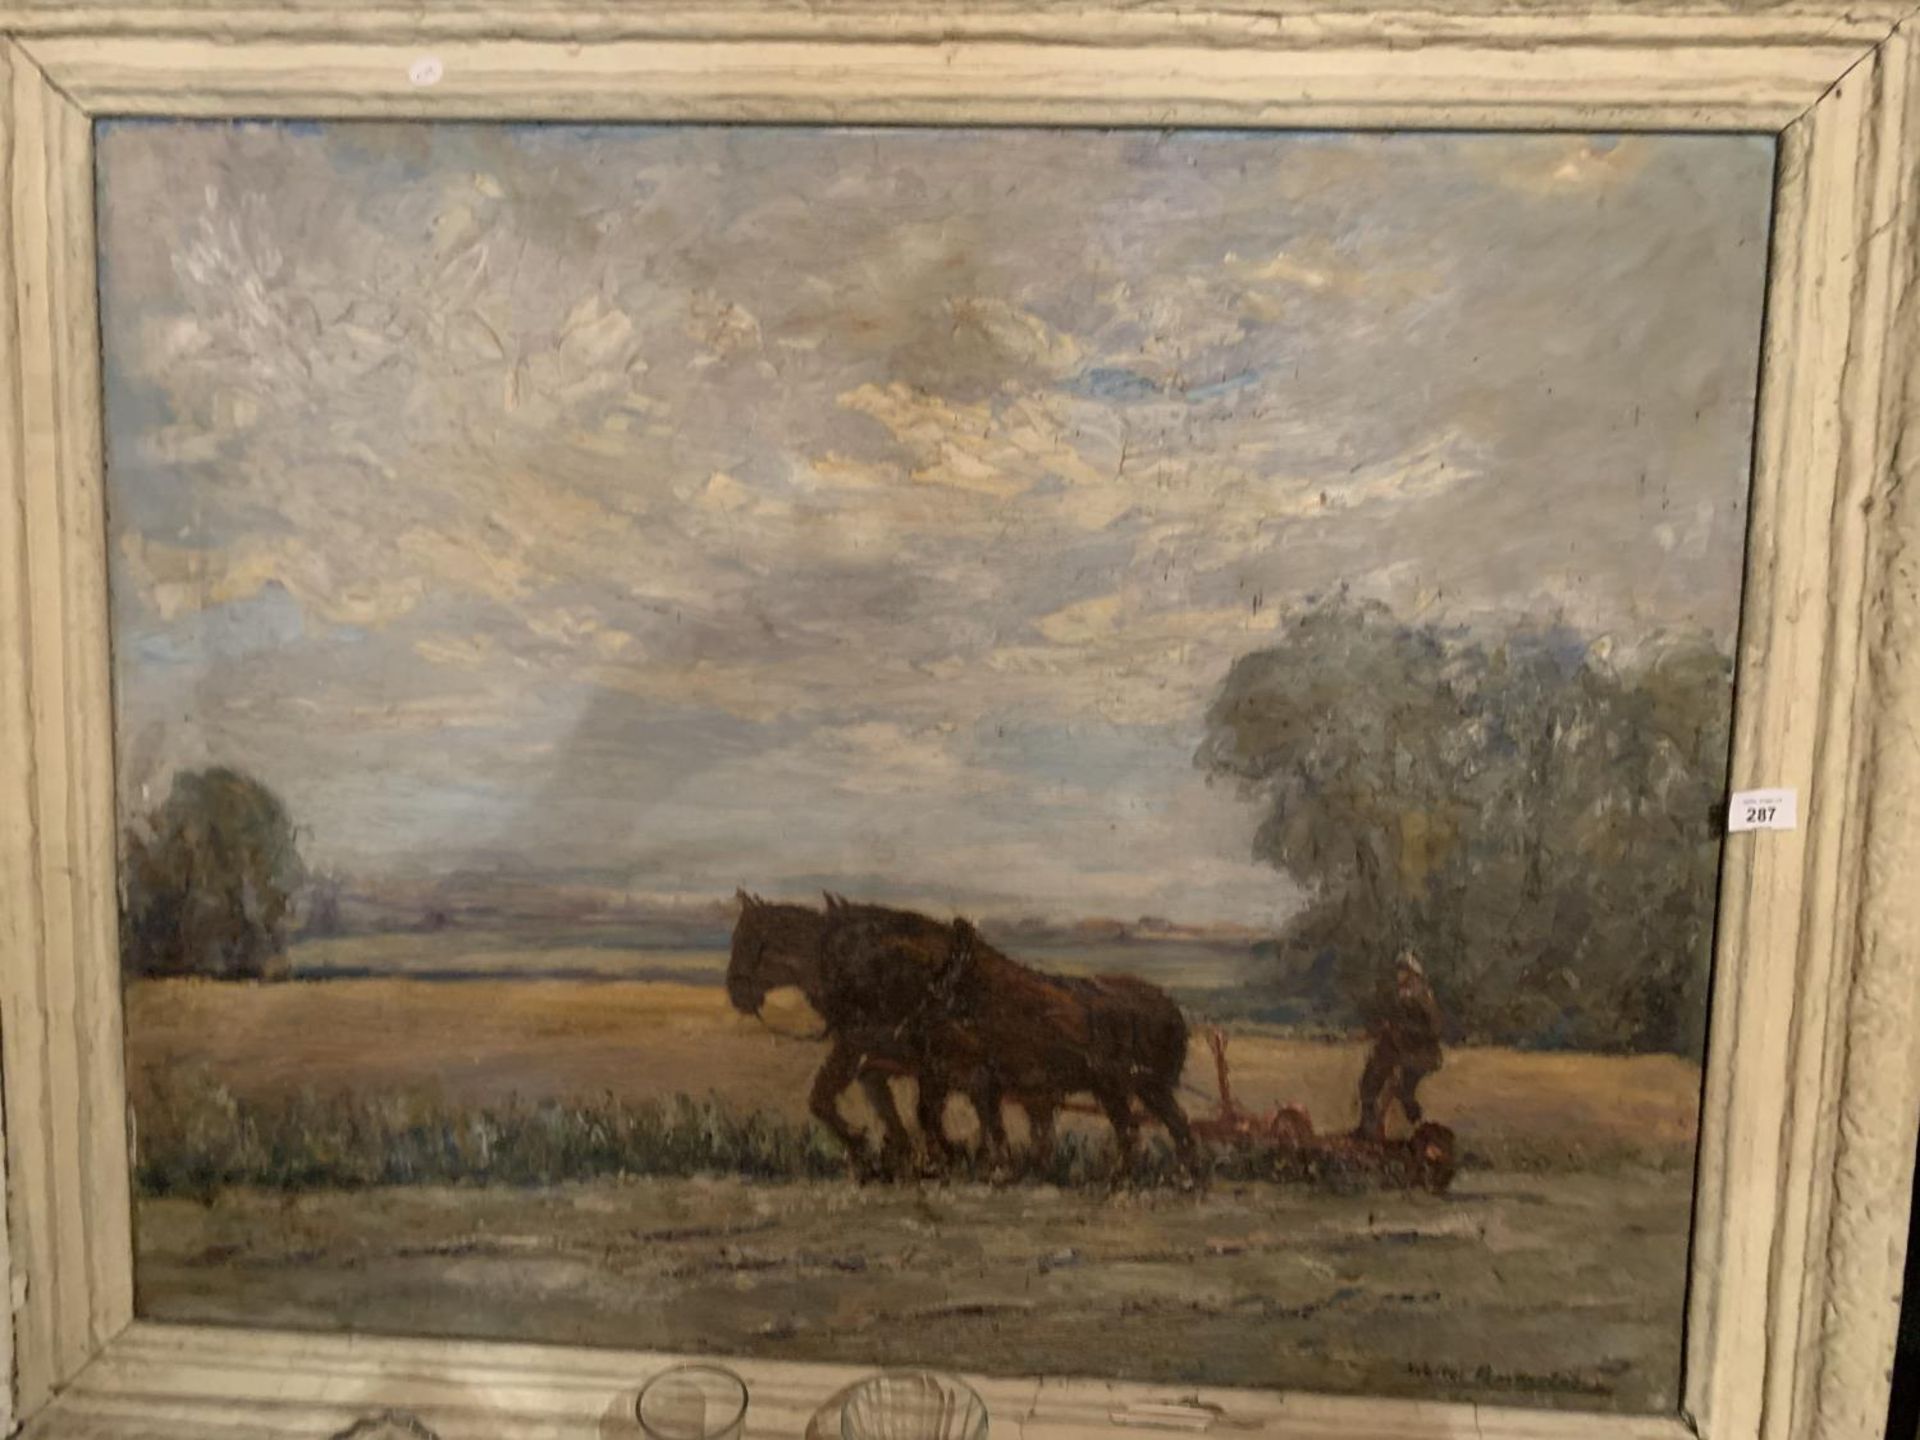 A LARGE FRAMED PAINTING OF HORSES PLOUGHING